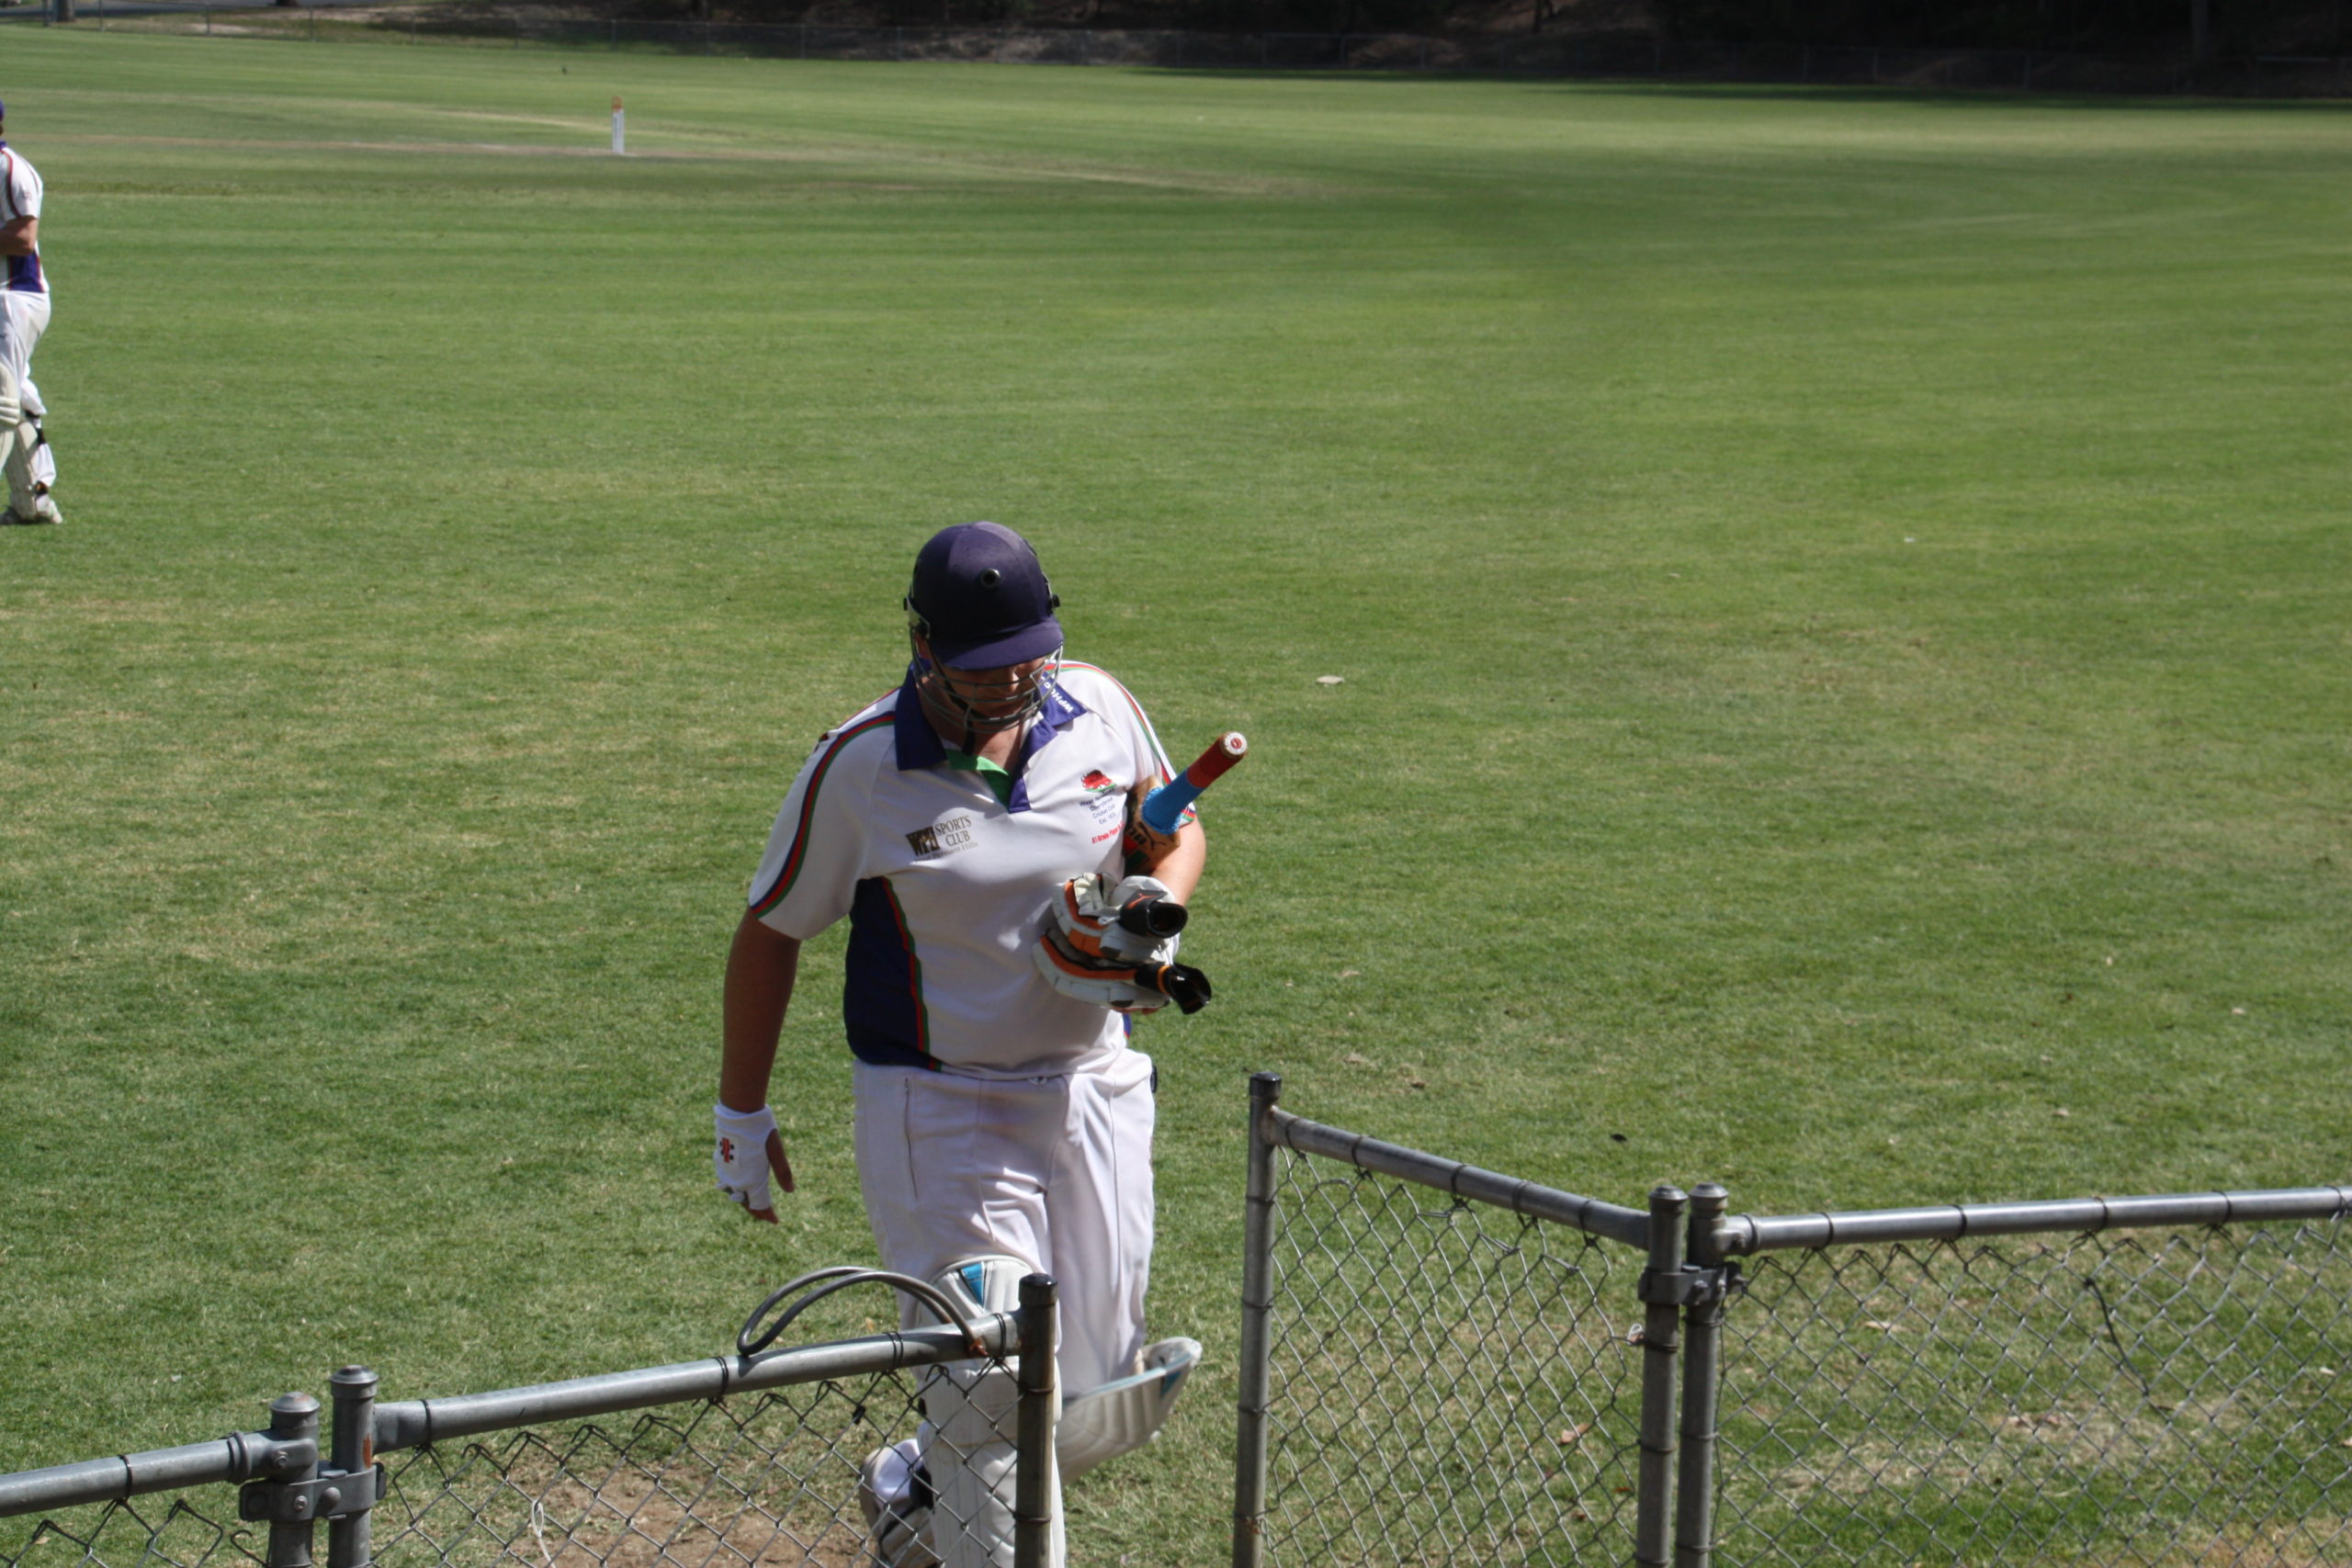 Peter Stott (A1 2006/07 to 2014/15) finishes his A1 career - A1 Grand Final (Rofie 4) @ Asquith Oval 28th and 29th March 2015.